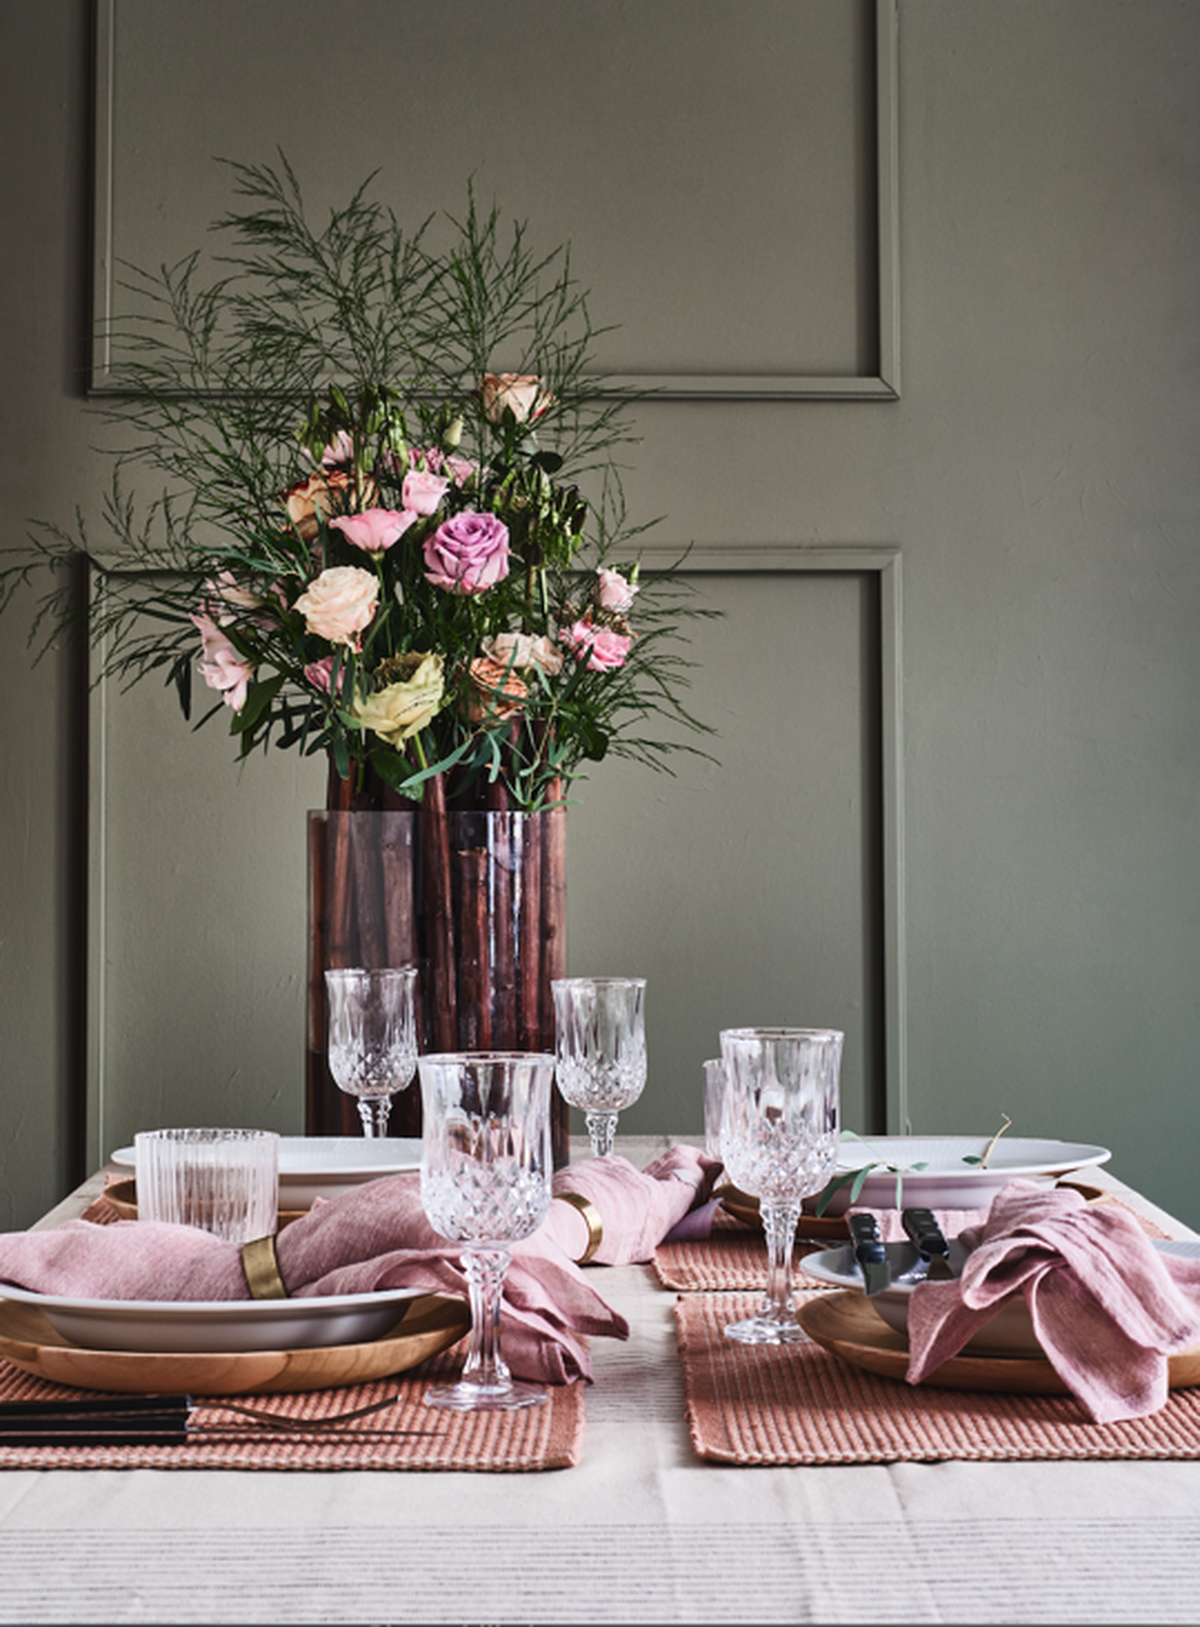 Table setting in warm Nordic style created by Pernille Albers and Nick Degn Fotografi for Mad&Bolig